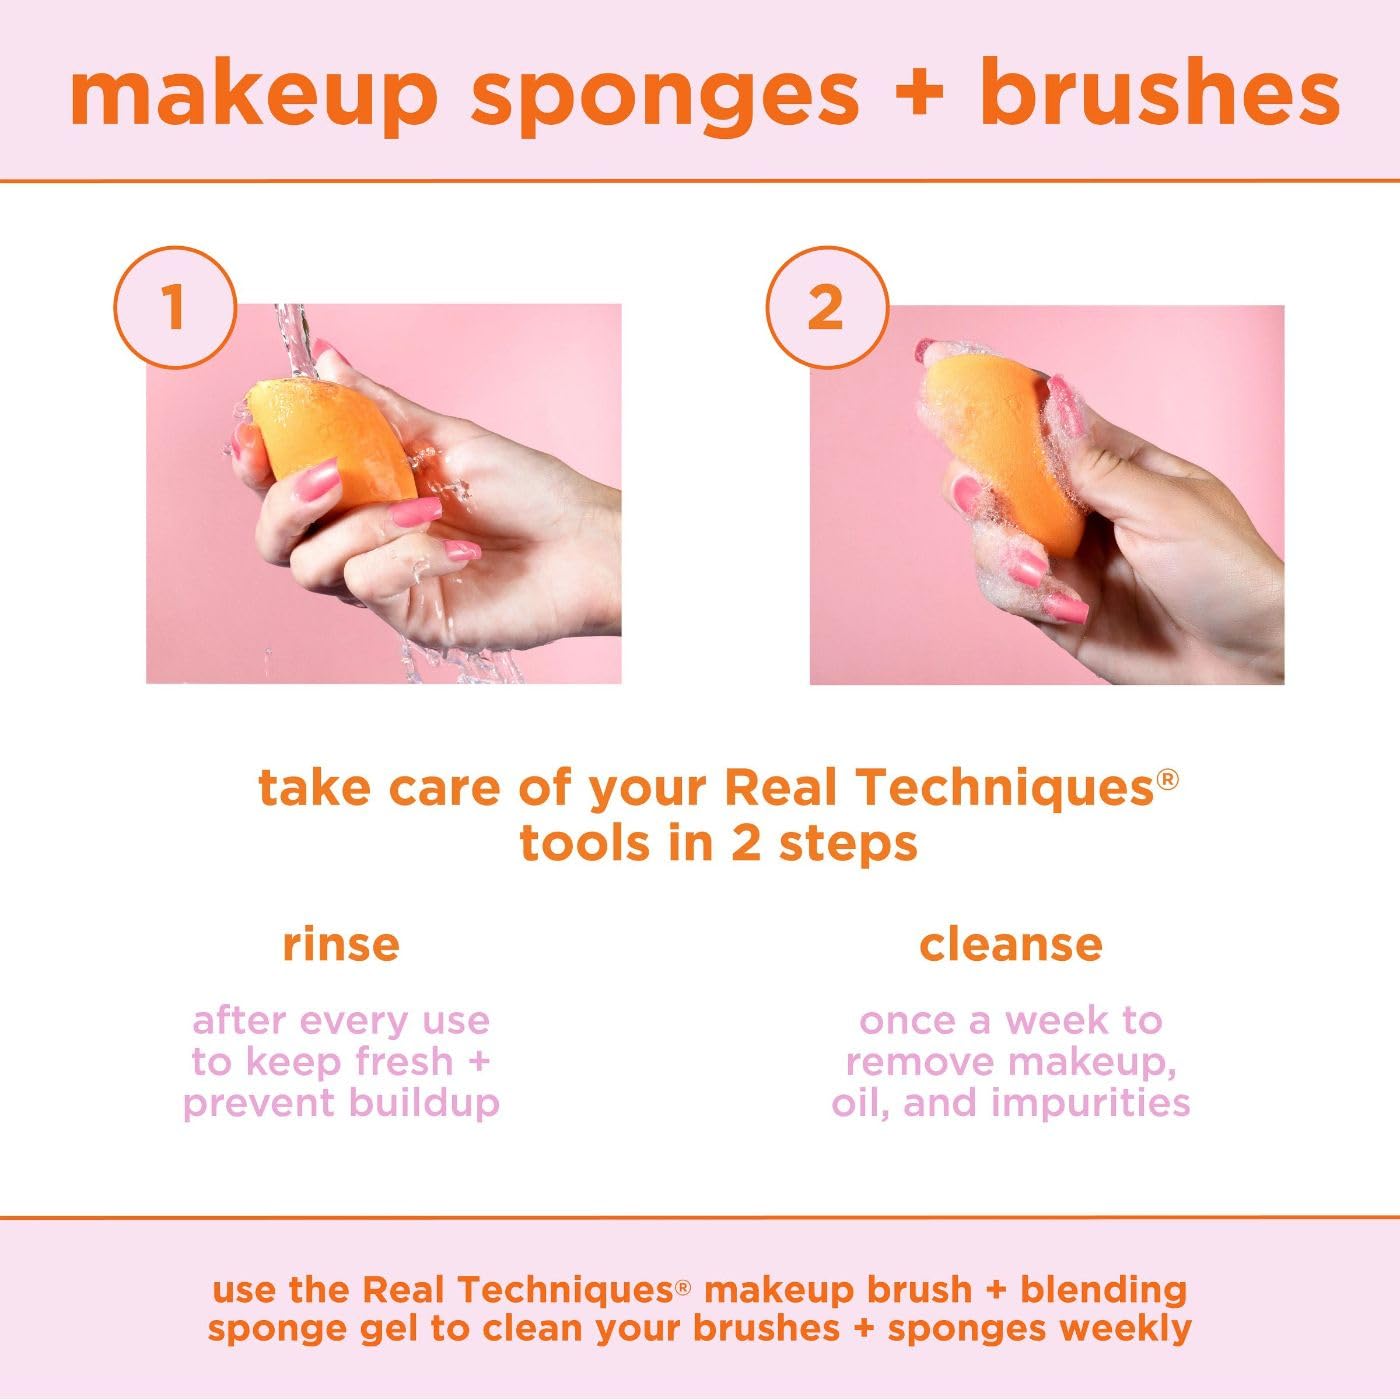 Real Techniques Level Up Brush And Sponge Kit, Makeup Brushes For Eyeshadow, Foundation, Blush, & Bronzer, Makeup Blending Sponge, Professional Quality Makeup Tools, Synthetic Bristles, 8 Piece Set